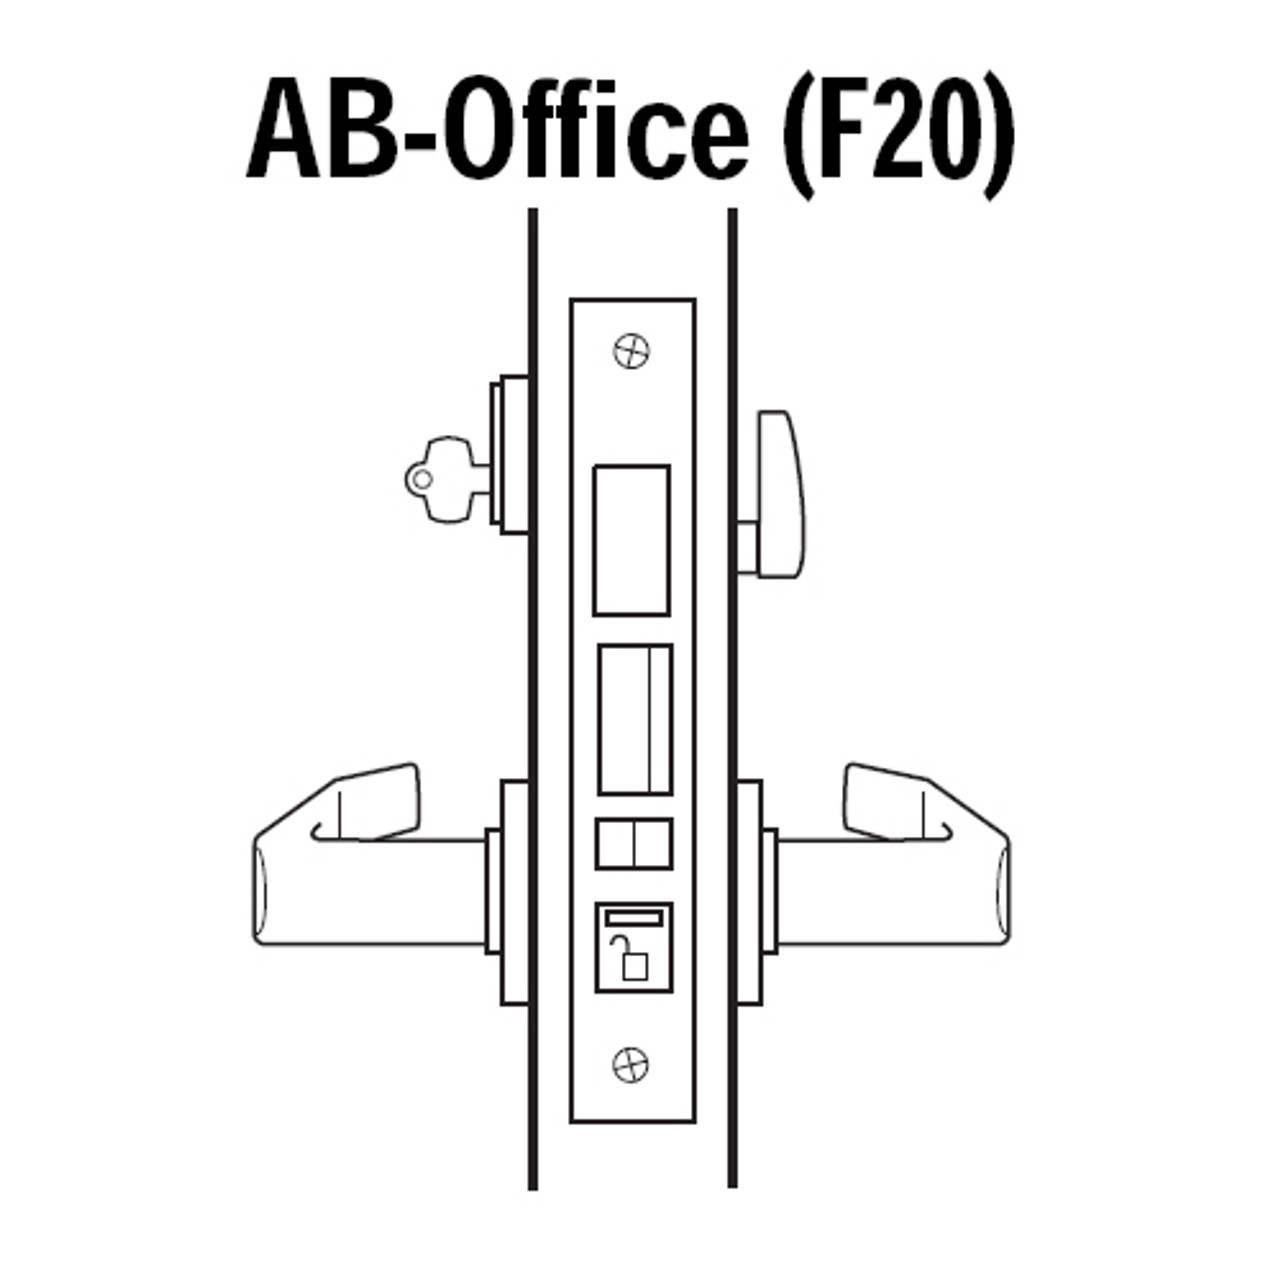 45H7AB14R613VIN Best 45H Series Office with Deadbolt Heavy Duty Mortise Lever Lock with Curved with Return Style and Visual Keyed Indicator in Oil Rubbed Bronze